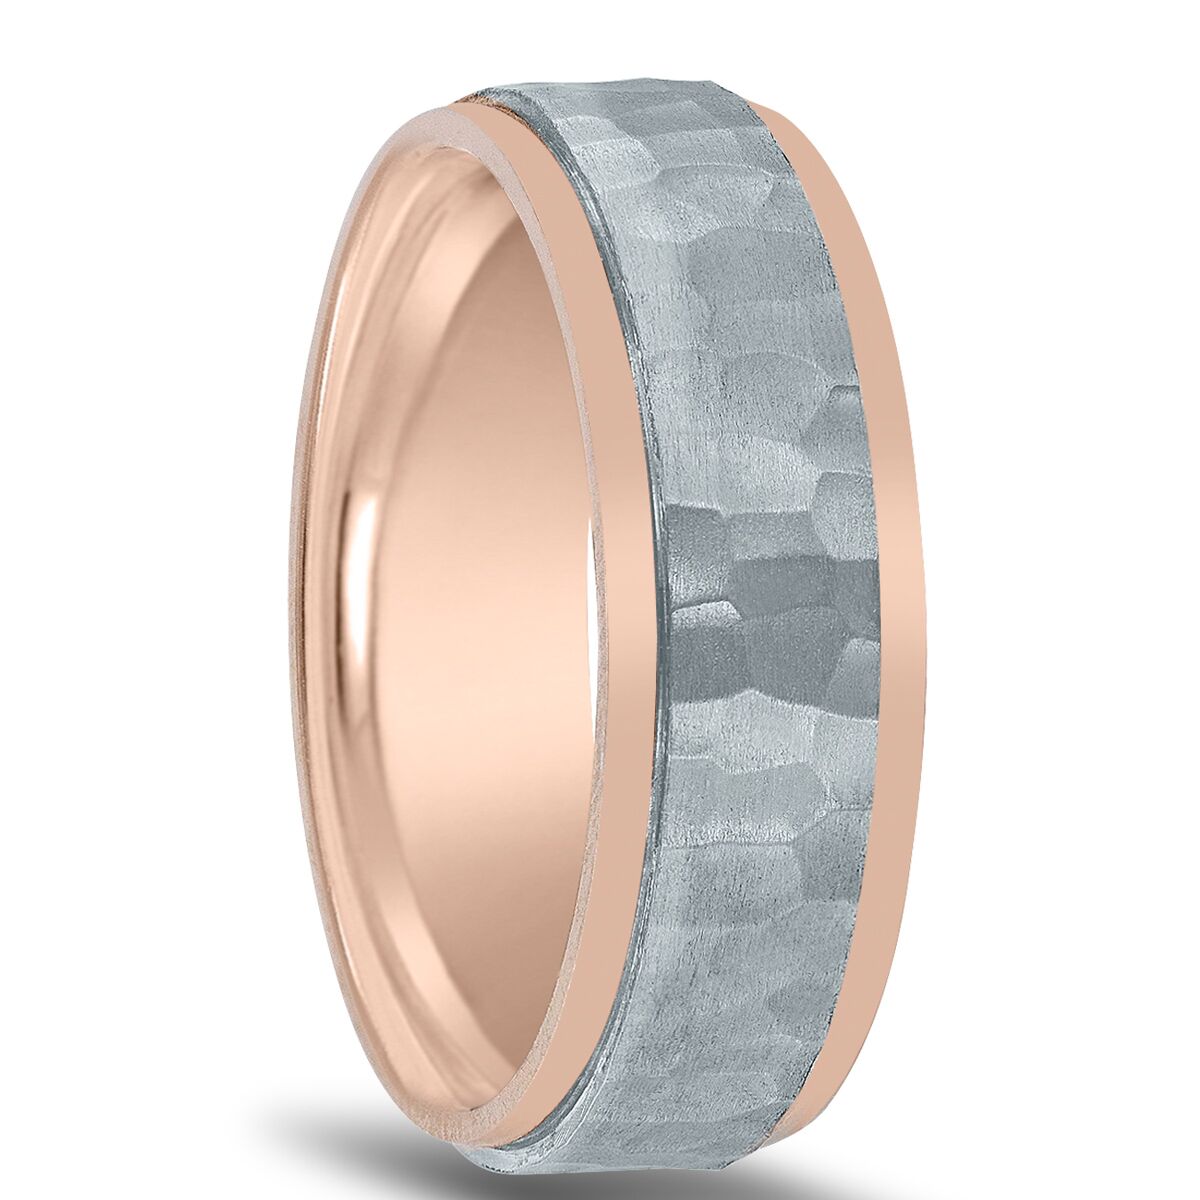 Two Tone Hammered Men's Wedding Ring